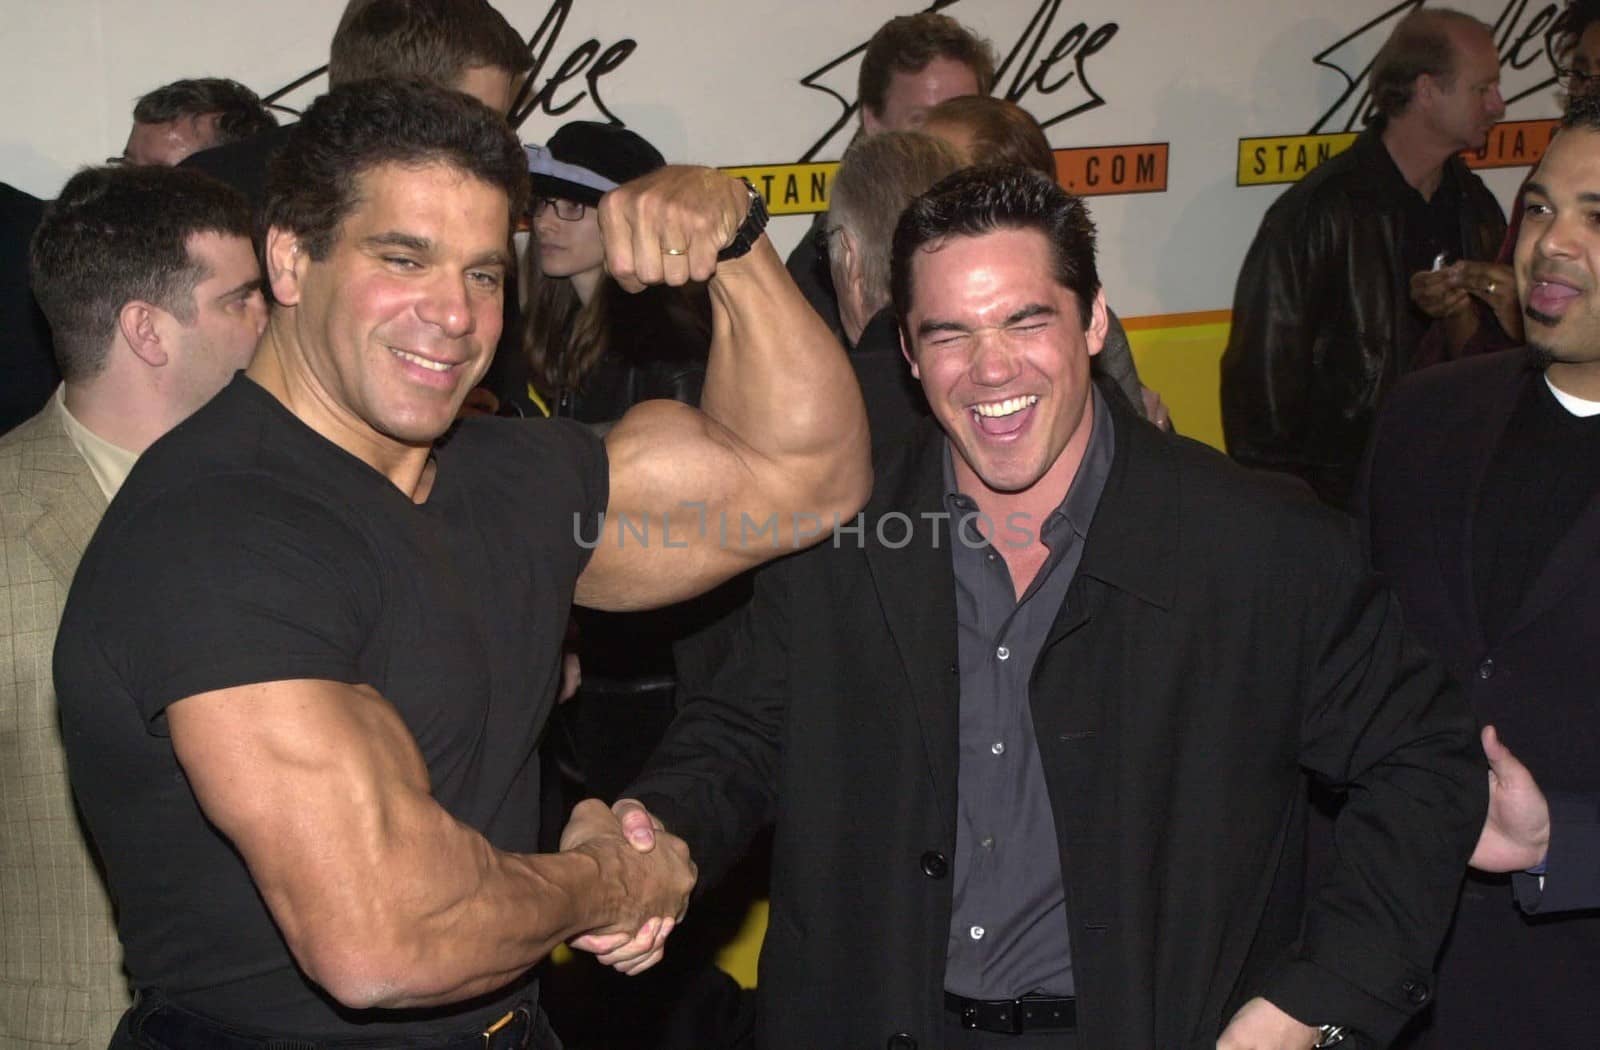 Lou Ferrigno and Dean Cain at the Hollywood Media Convergence Gala, 02-29-00